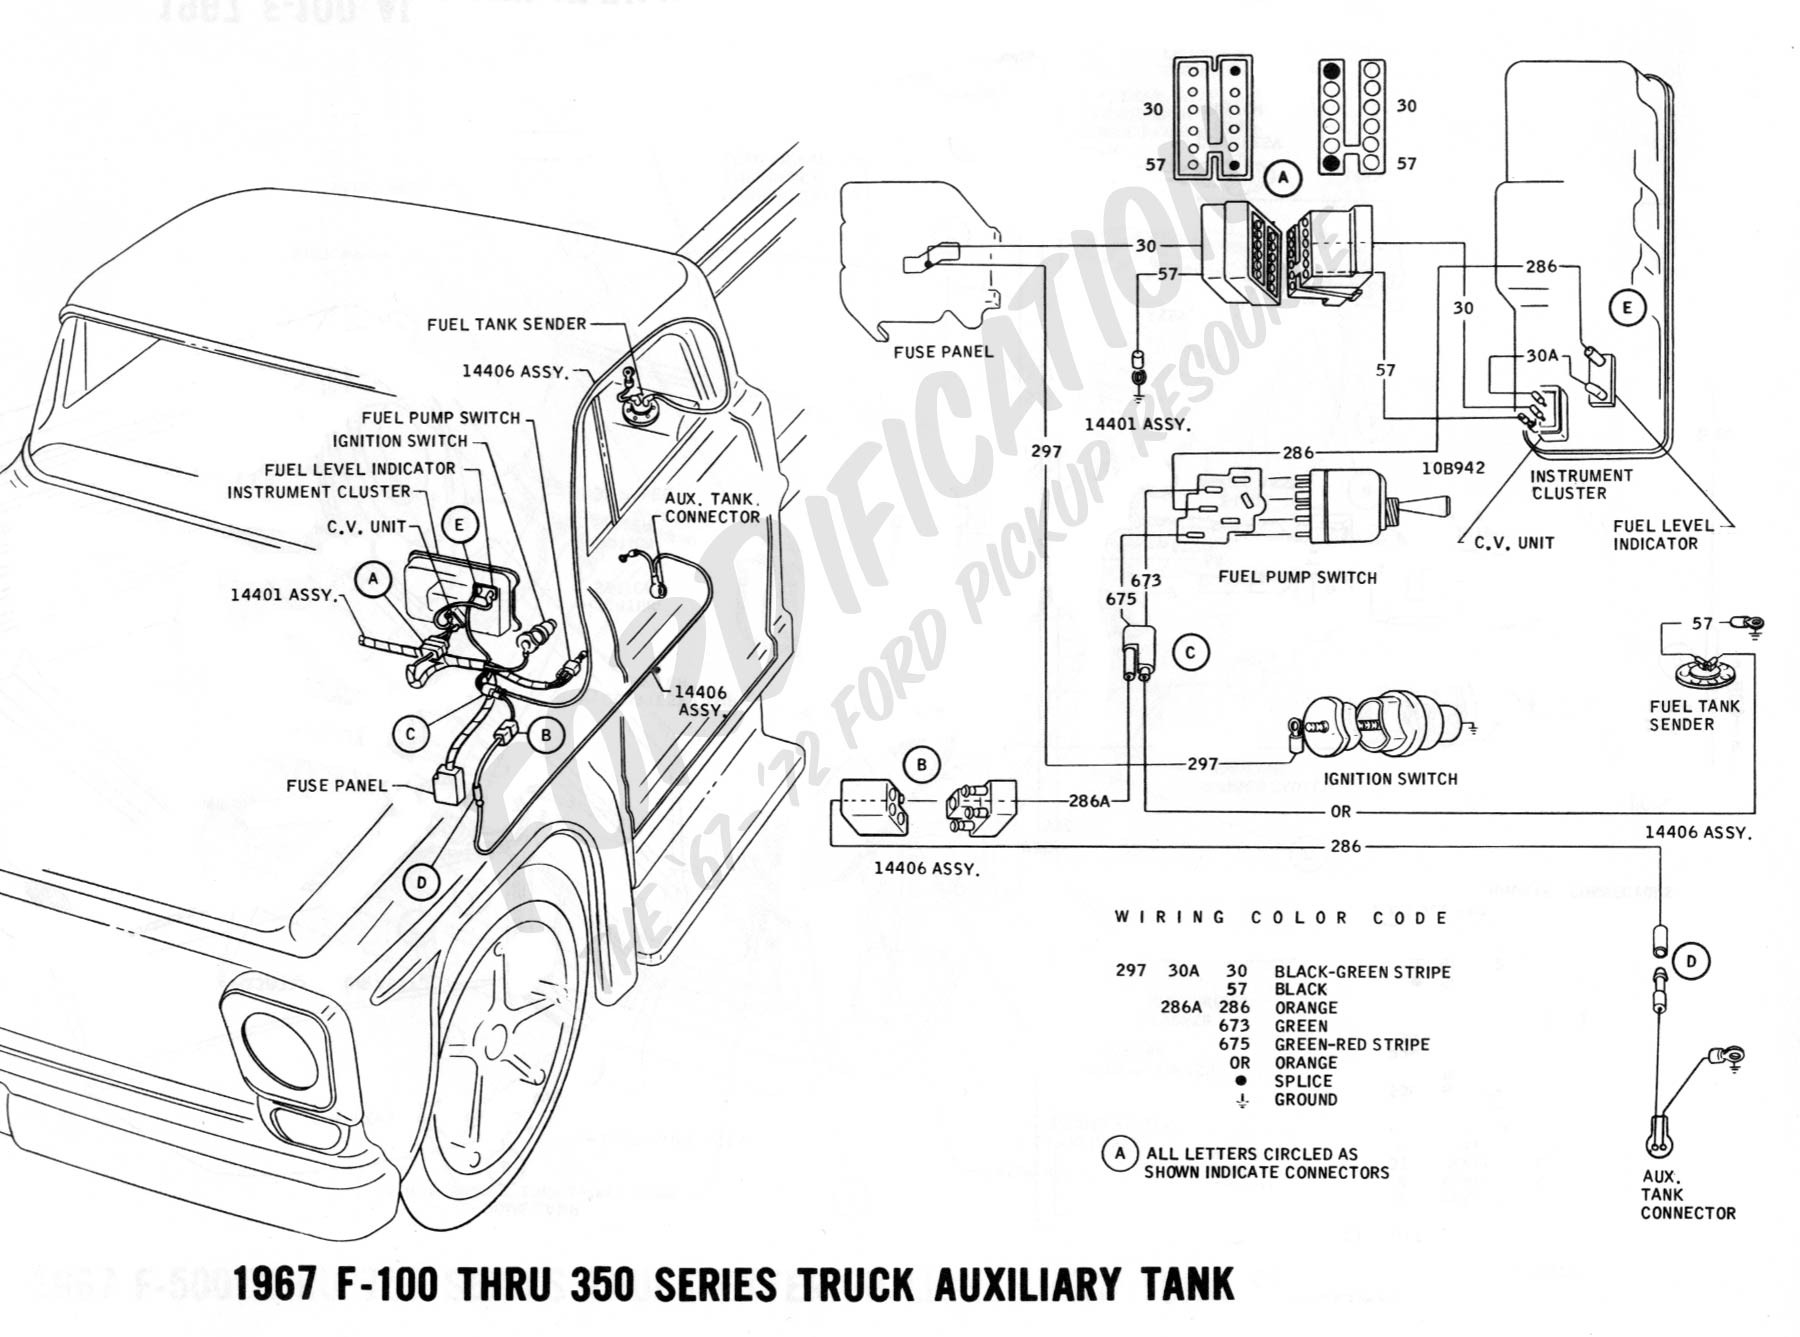 1981 Chevy Truck Wiring Diagram ford Truck Technical Drawings and Schematics Section H Wiring Of 1981 Chevy Truck Wiring Diagram